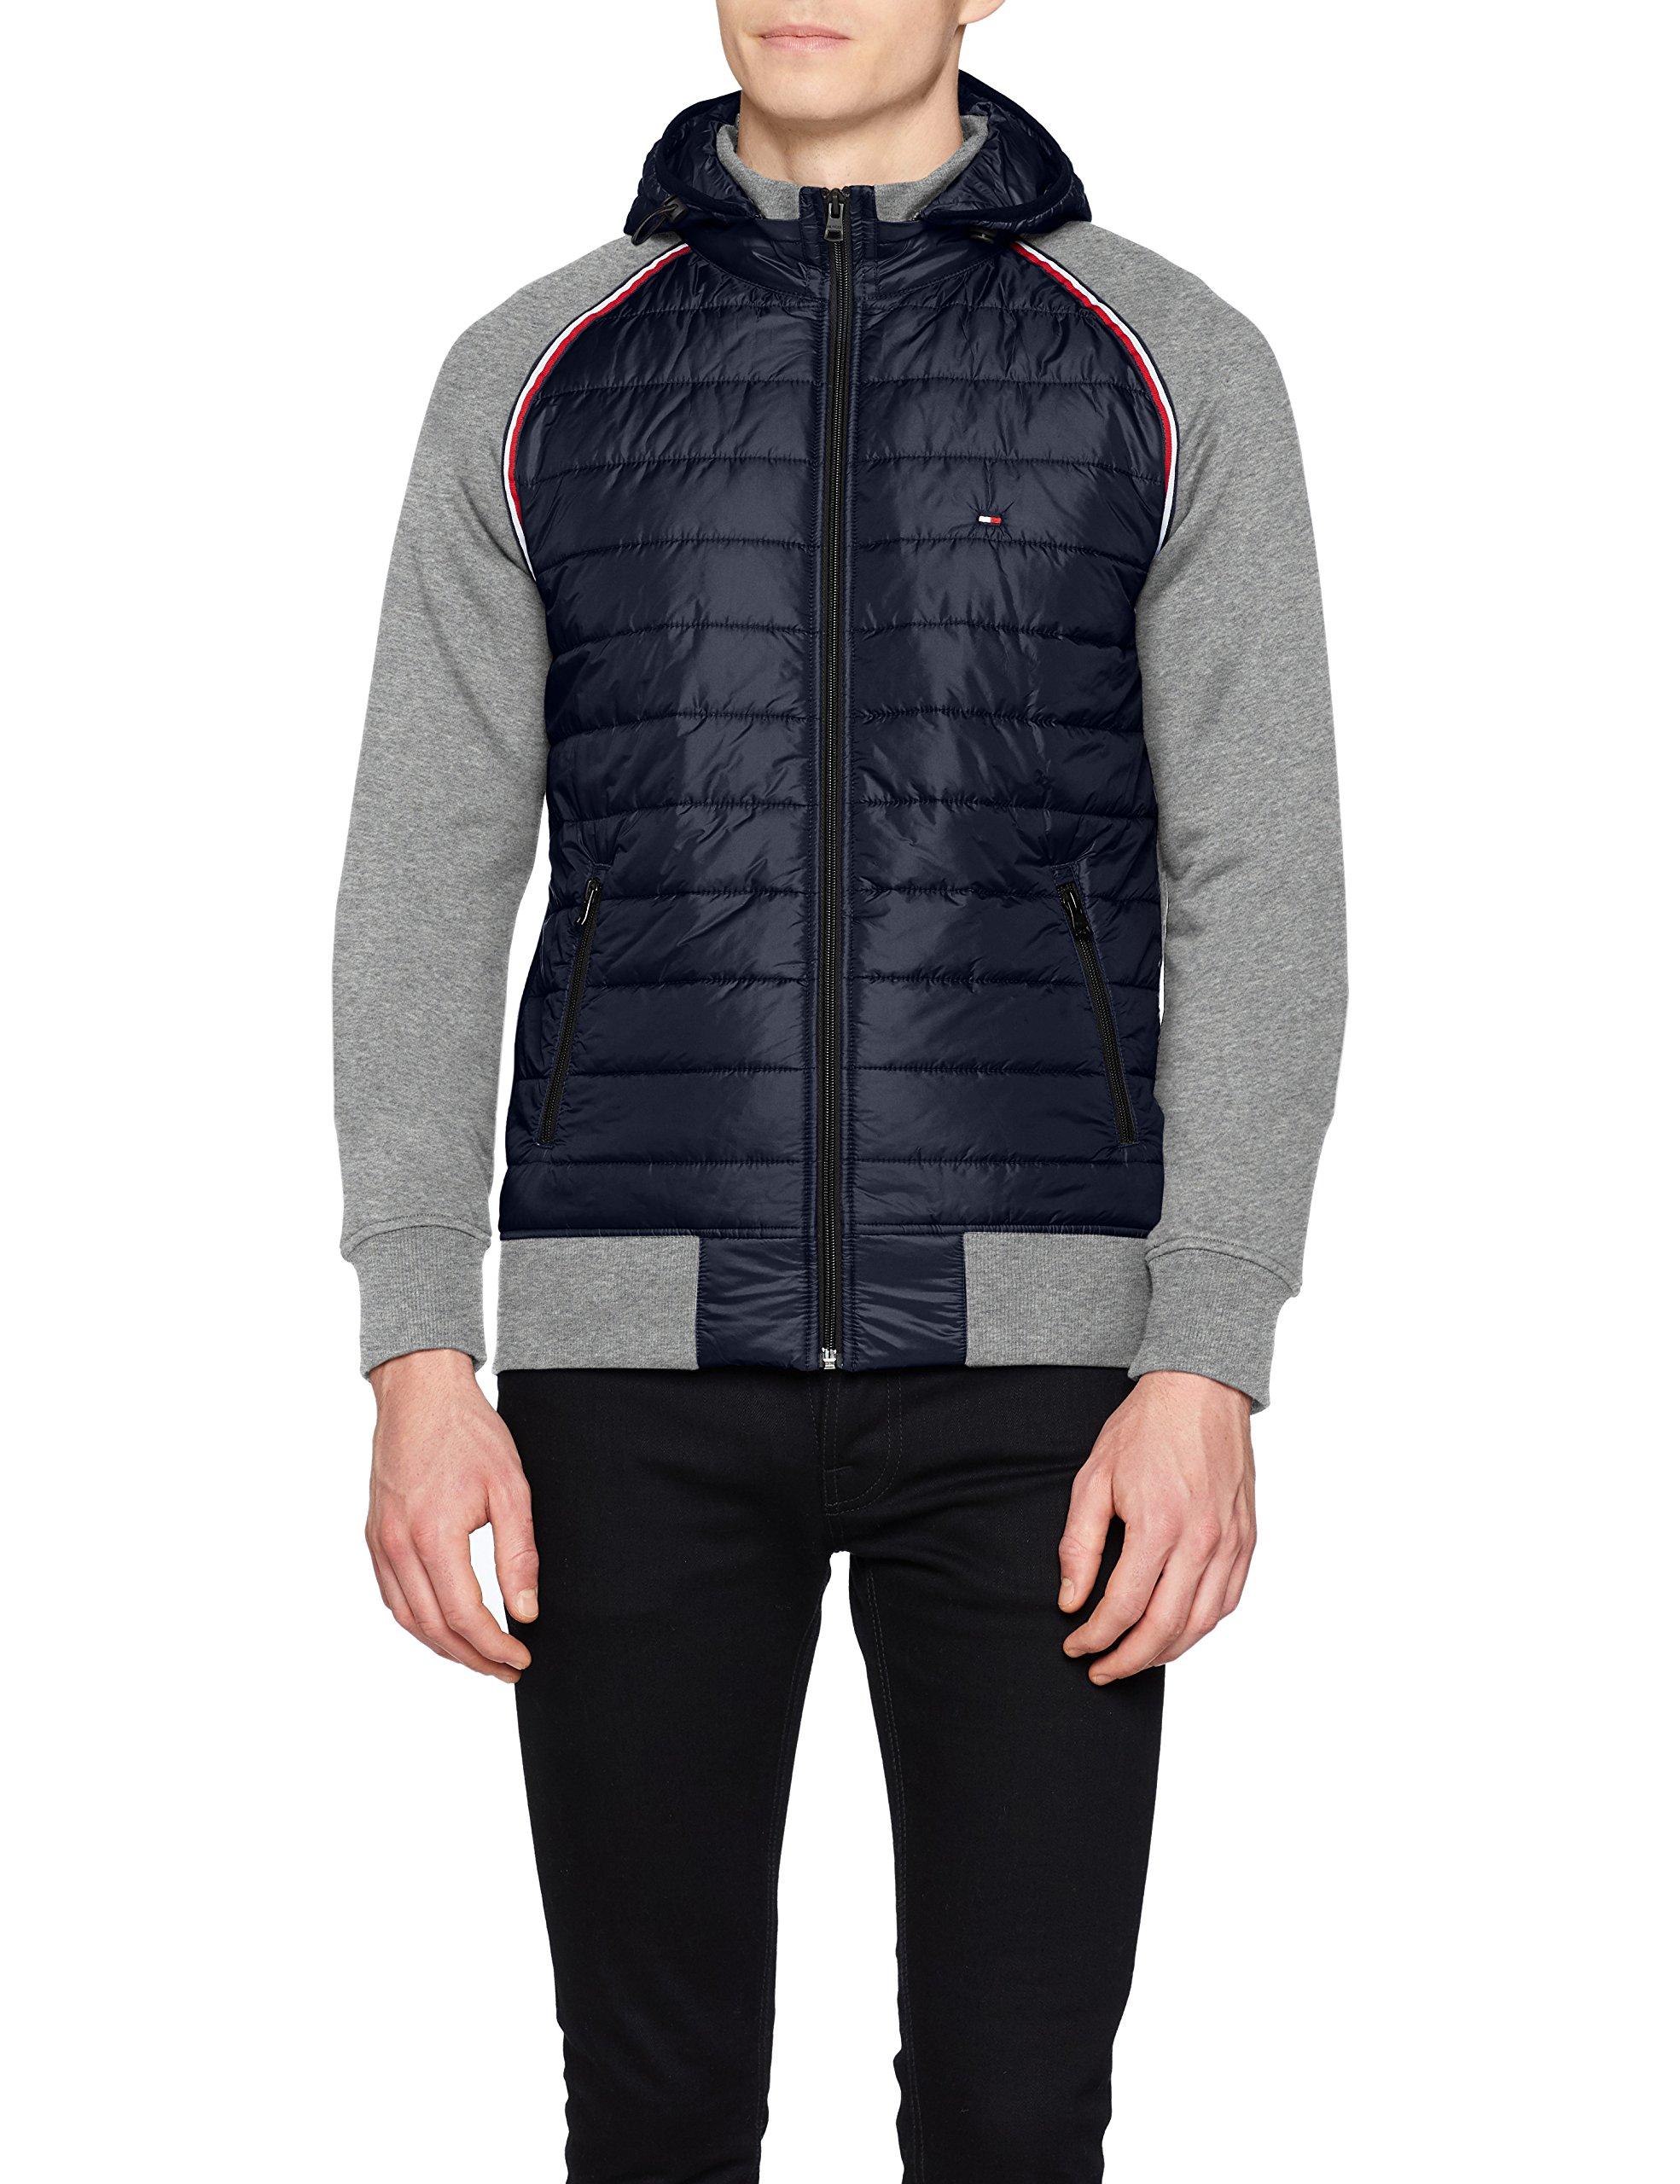 tommy hilfiger front panel hooded zip through Off 66% - adencon.com